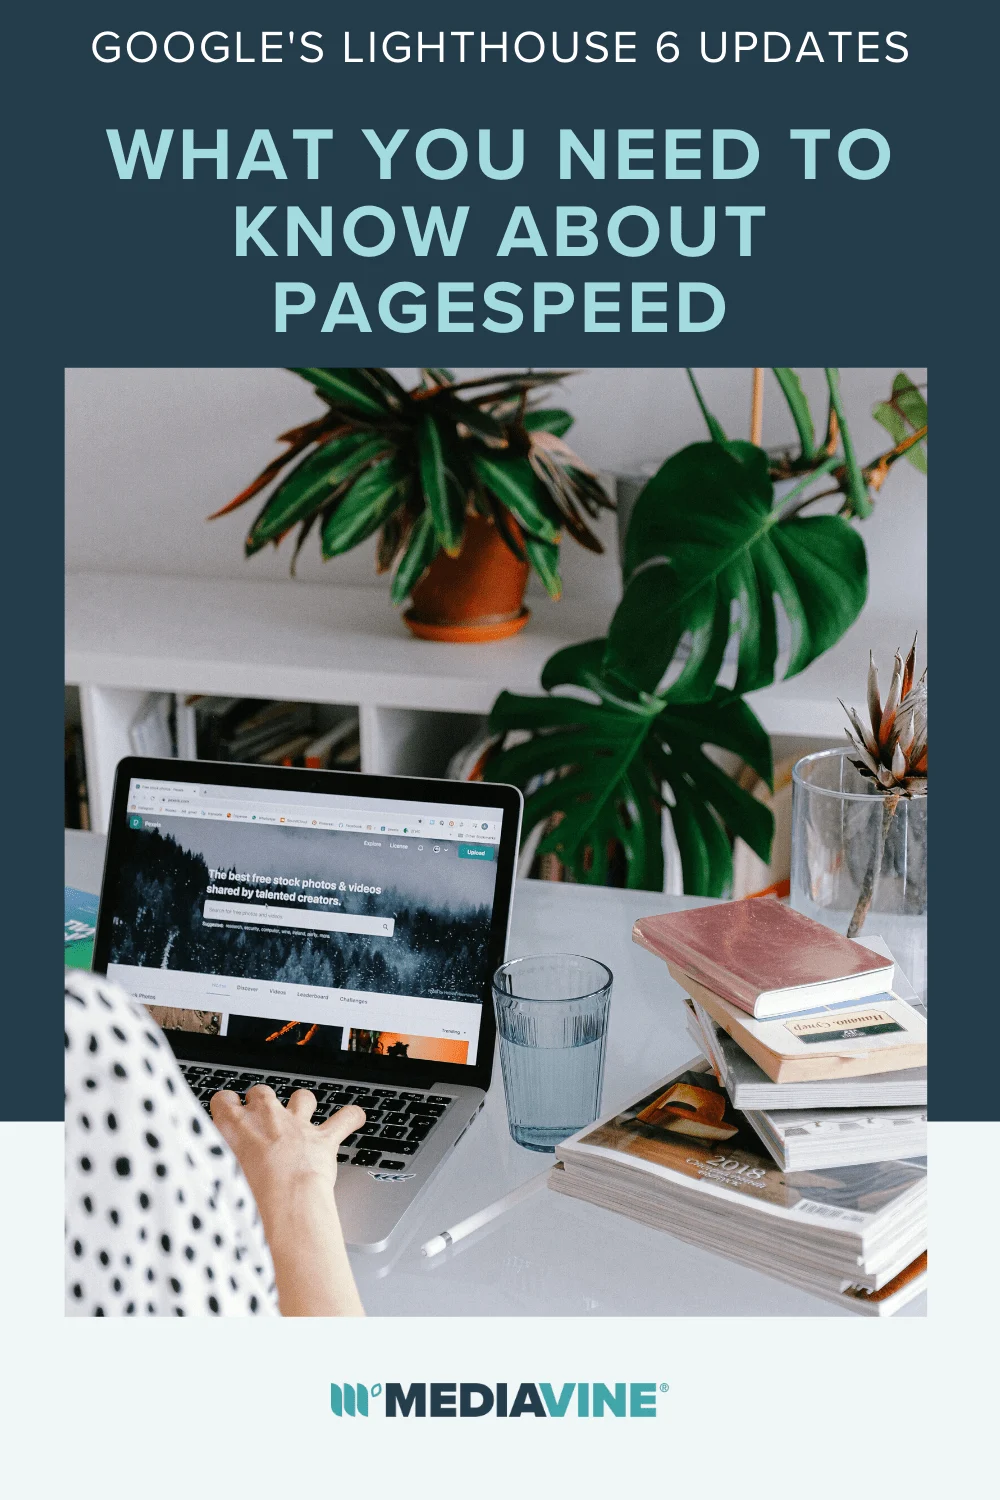 Mediavine Pinterest image - Google's Lighthouse 6 updatse: What you need to know about pagespeed